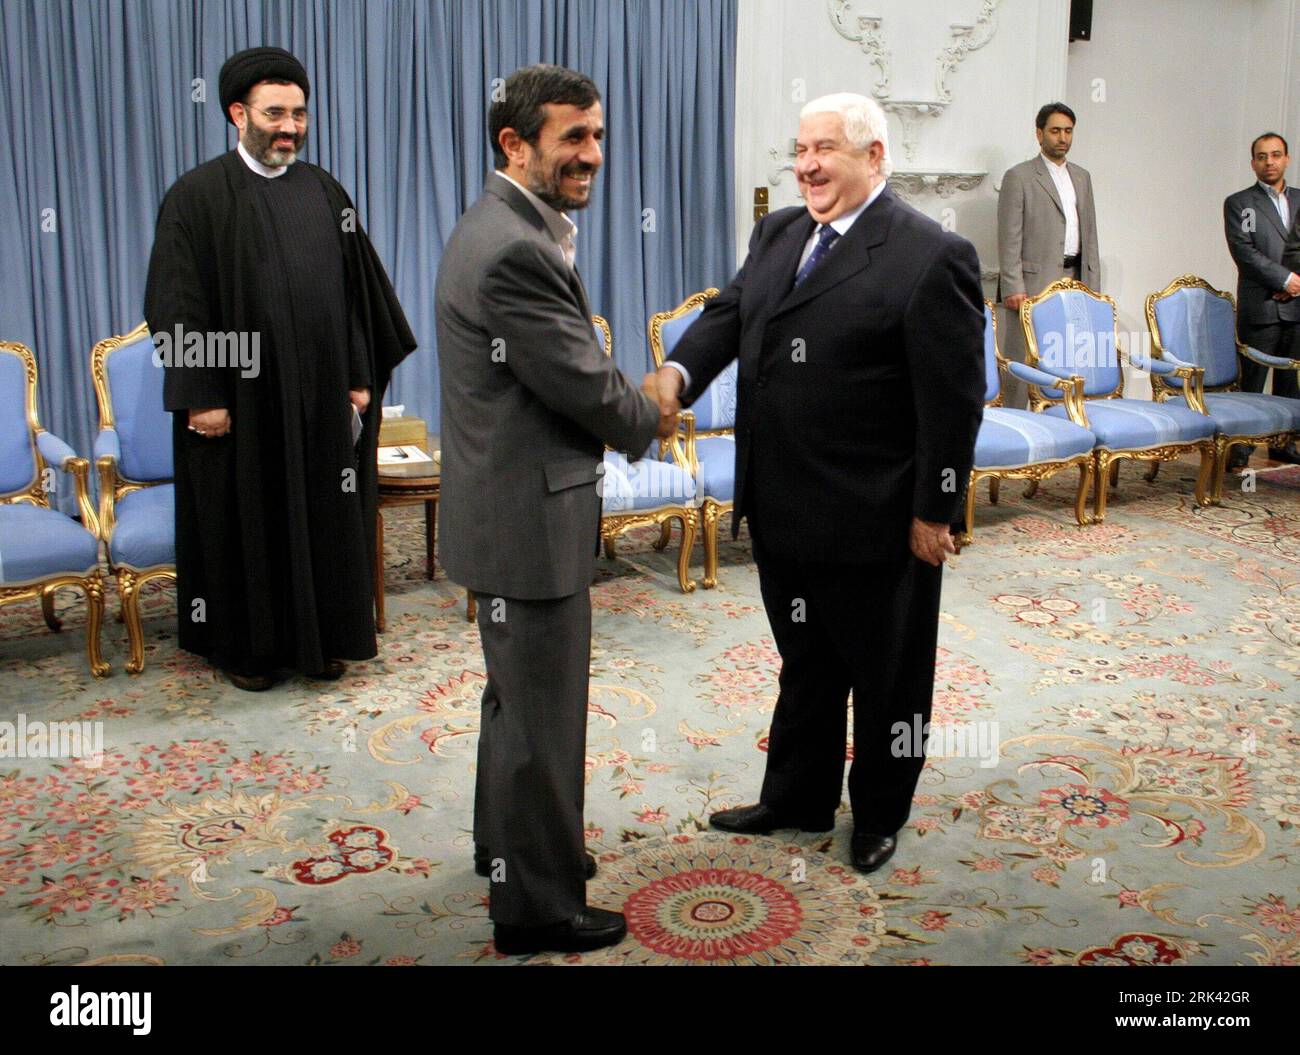 Bildnummer: 53579250  Datum: 04.11.2009  Copyright: imago/Xinhua (091104) -- TEHRAN, Nov. 4, 2009 (Xinhua) -- Iranian President Mahmoud Ahmadinejad (L front) shakes hands with the visiting Syrian Foreign Minister Walid Muallem in Tehran, capital of Iran, Nov. 4, 2009. Walid Muallem arrived in Iran on Wednesday for a two-day visit to the country. (Xinhua/Ahmad Halabisaz) (gxr) (2)IRAN-TEHRAN-AHMADINEJAD-SYRIAN FM-MEETING PUBLICATIONxNOTxINxCHN People Politik Premiumd kbdig xub 2009 quer     Bildnummer 53579250 Date 04 11 2009 Copyright Imago XINHUA  TEHRAN Nov 4 2009 XINHUA Iranian President Ma Stock Photo